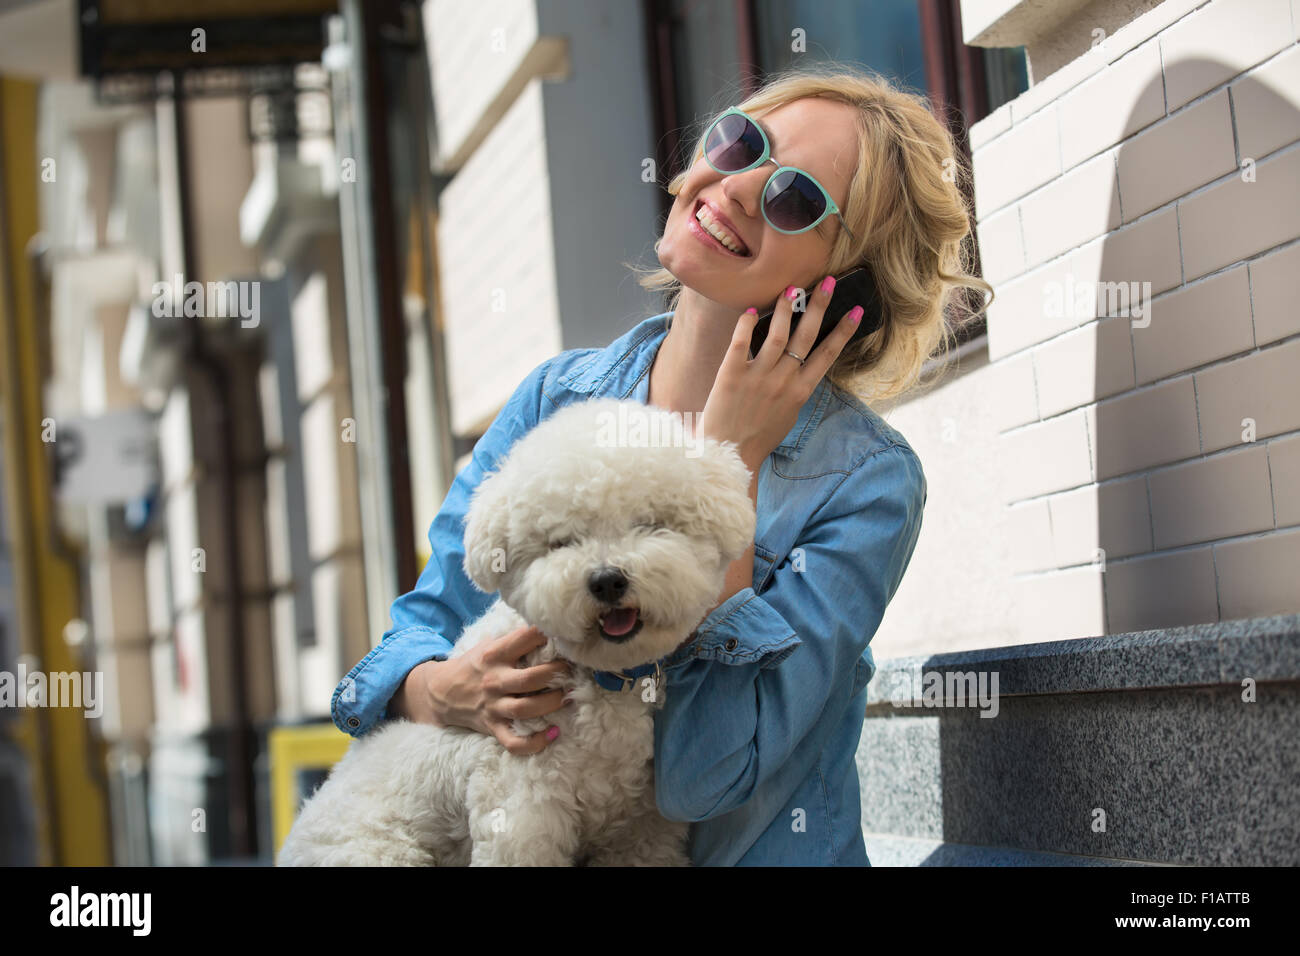 Cute blonde in sunglasses and a bright blue denim shirt emotionally talking on a cell phone. Bichon Frise white dog sitting on t Stock Photo